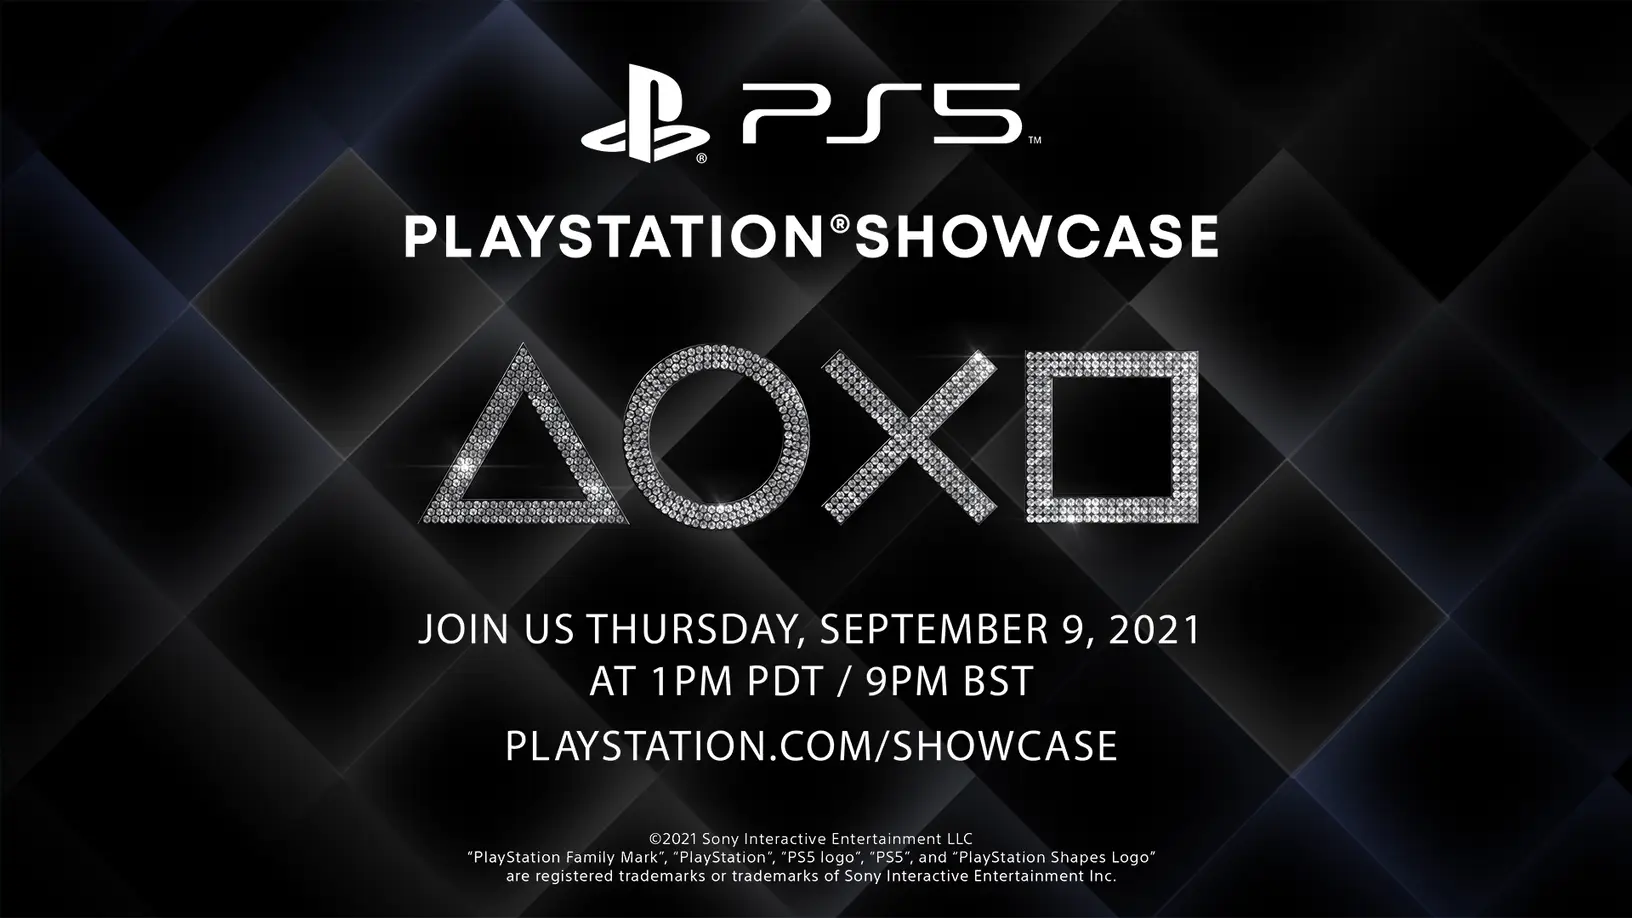 How to watch PlayStation Showcase 2021: Date and time, stream